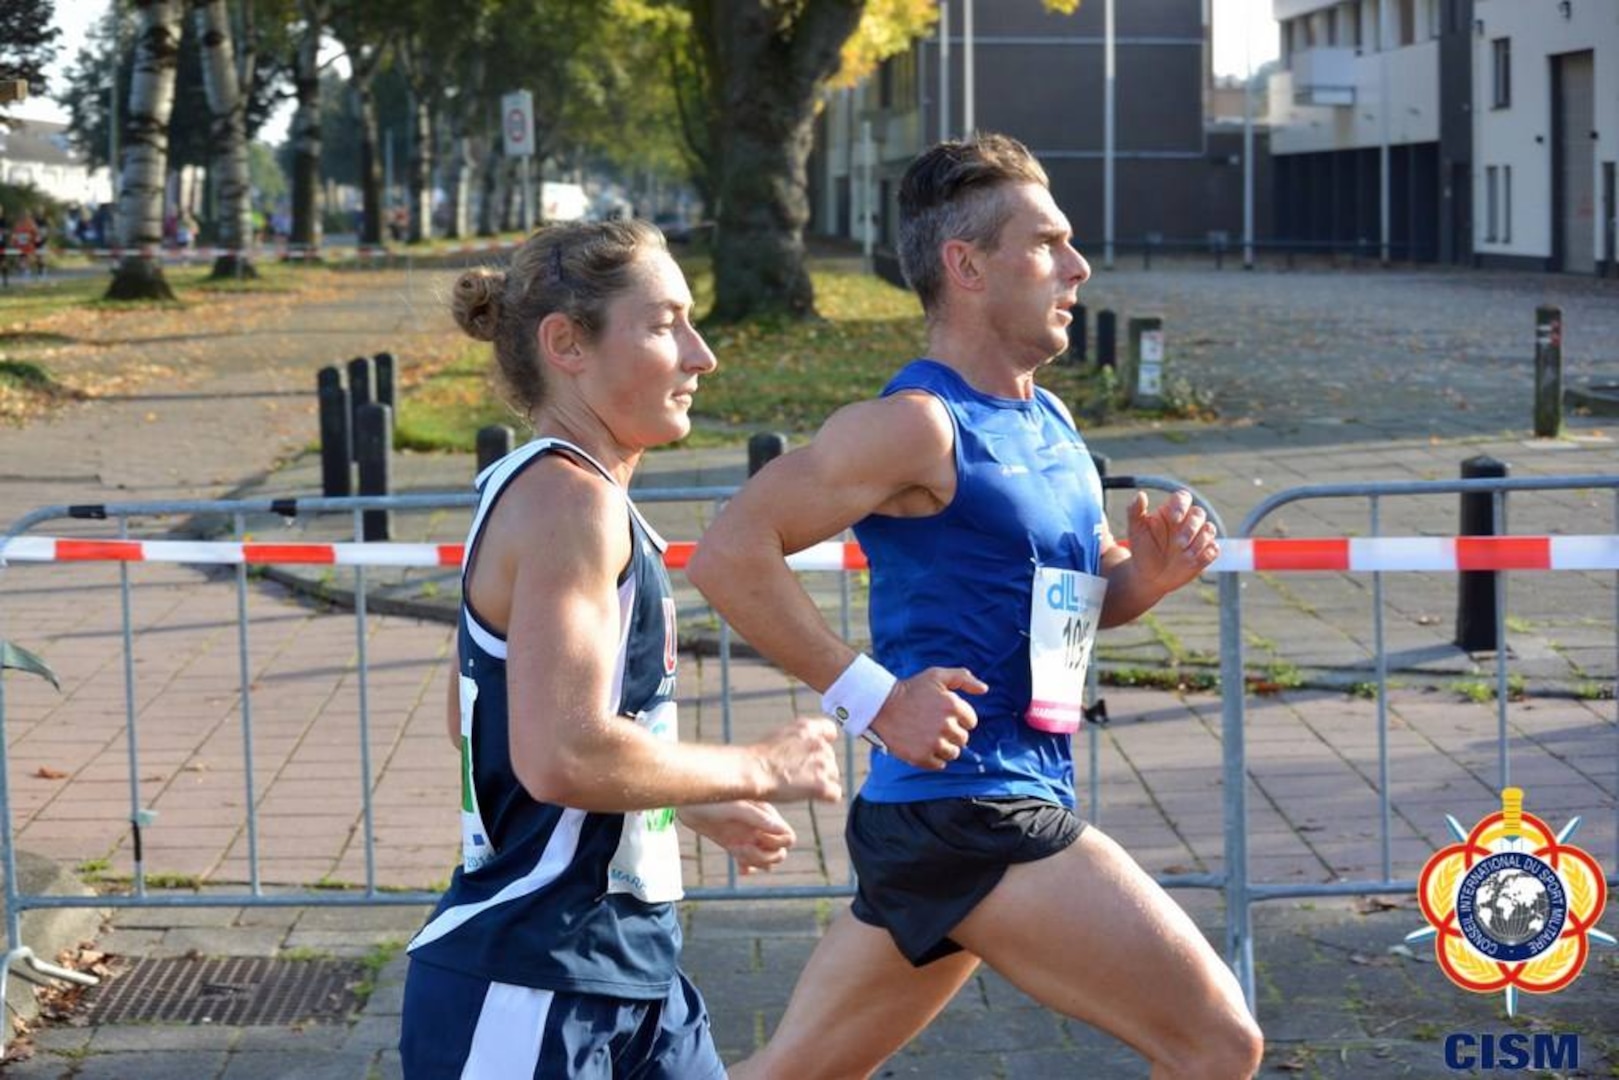 Air Force Staff Sgt. Emily Shertzer - 5th (7th overall) 2:49:56 during the 46th CISM Marathon World Military Championship 9-14 October 2014 in Eindhoven, Netherlands. The US Women took the team silver. 